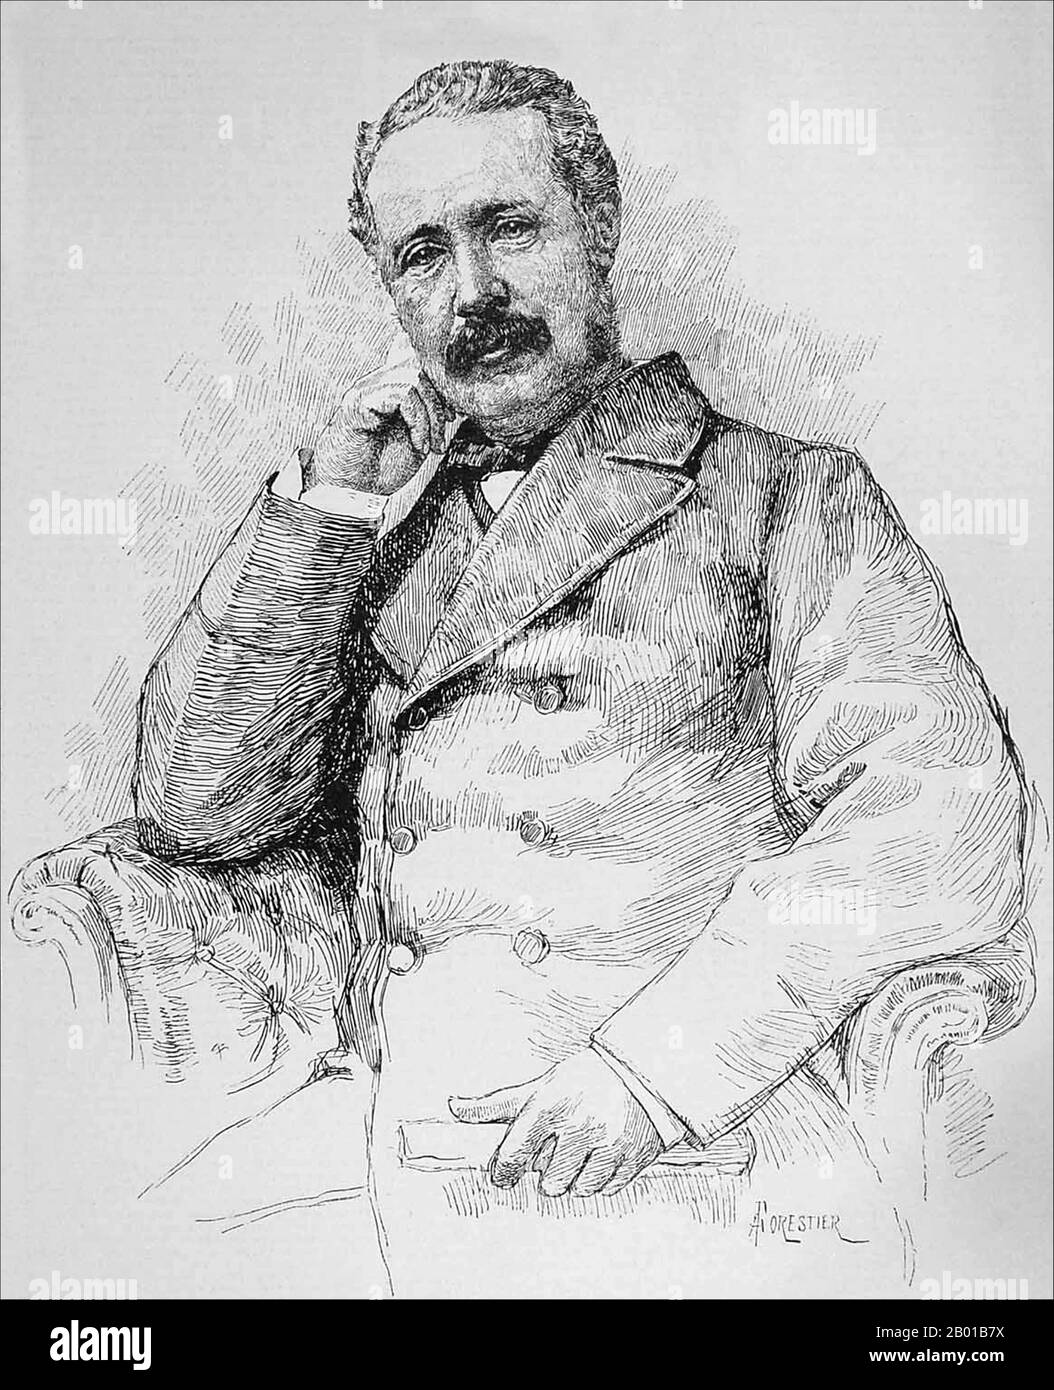 Great Britain: Major-General Charles George Gordon CB (28 January 1833 - 26 January 1885). Portrait sketch by Amedee Forestier (1854 - 18 November 1930), c. 1880s.  Major-General Charles George Gordon, also known as Chinese Gordon and Gordon Pasha, was a British Army officer and administrator who saw action in the Crimean War and in China. He served the Khedive of Egypt in 1873, becoming the Governor-General of the Sudan.  General Gordon was killed by Mahdist forces during the Mahdist War on January 26, 1885. The manner of his death is uncertain but it was romanticised in in the British media. Stock Photo